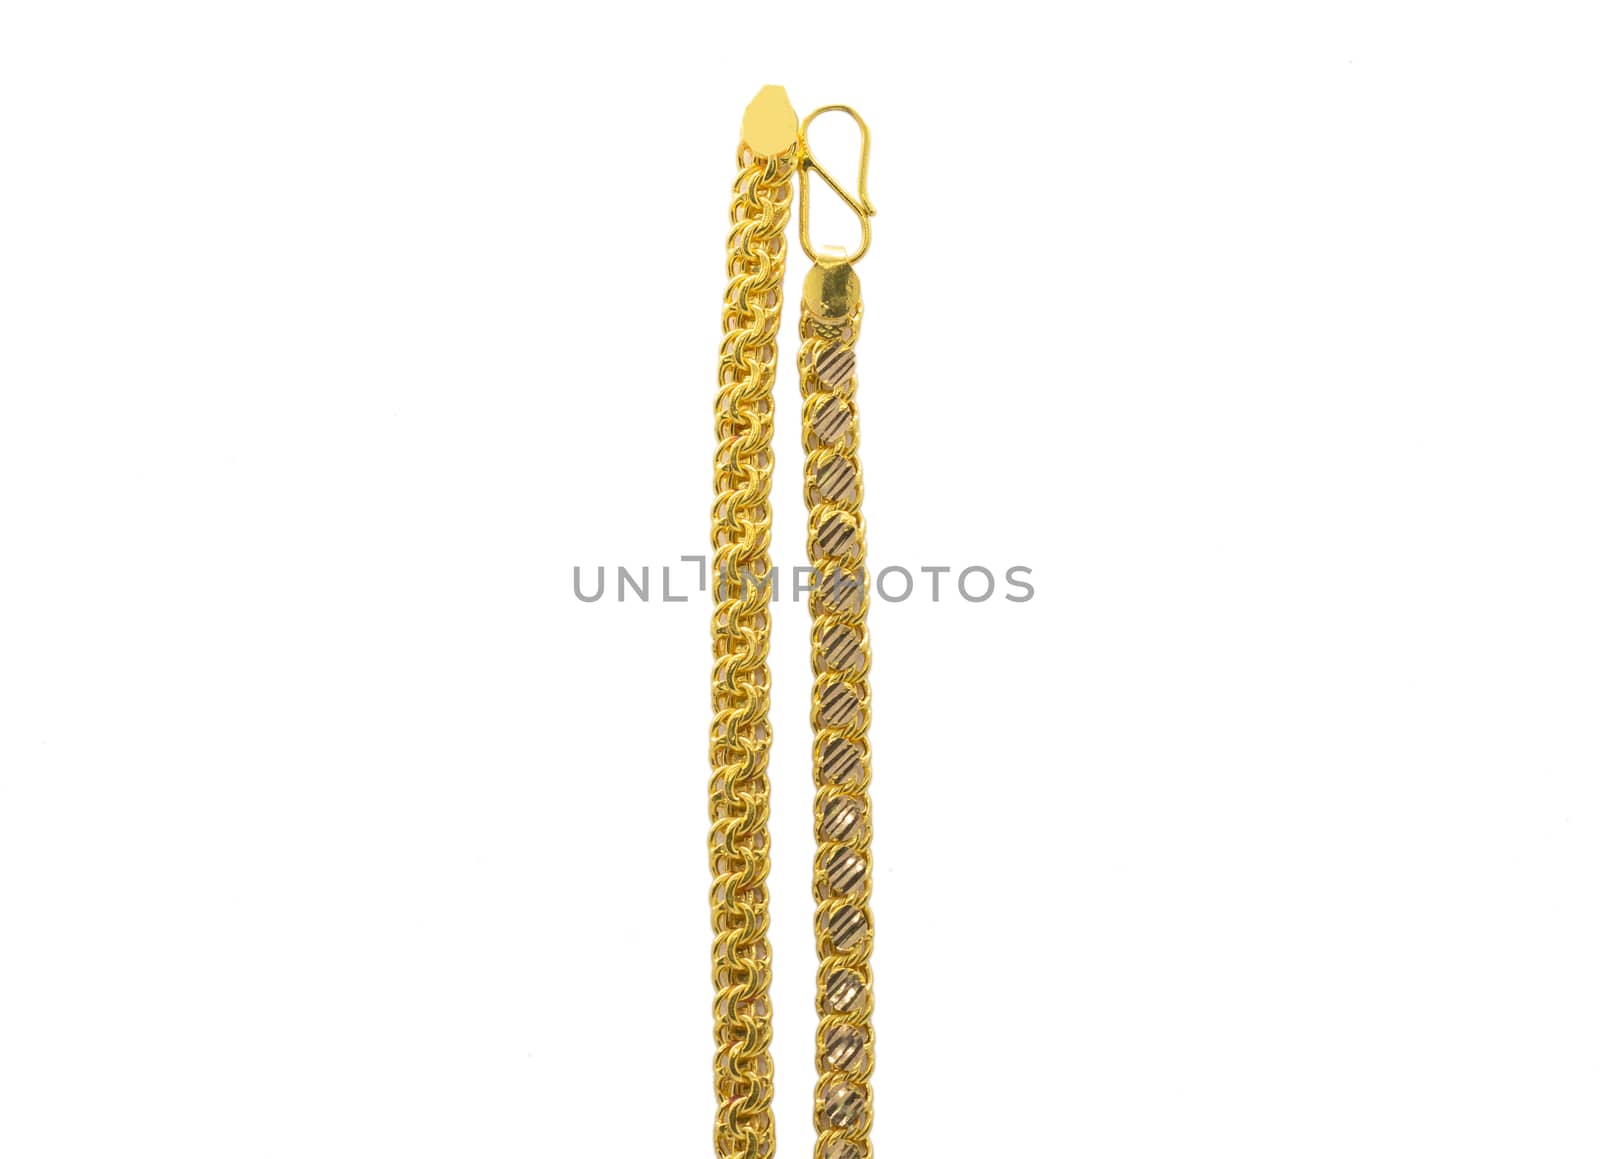 gold chain design on isolated white background